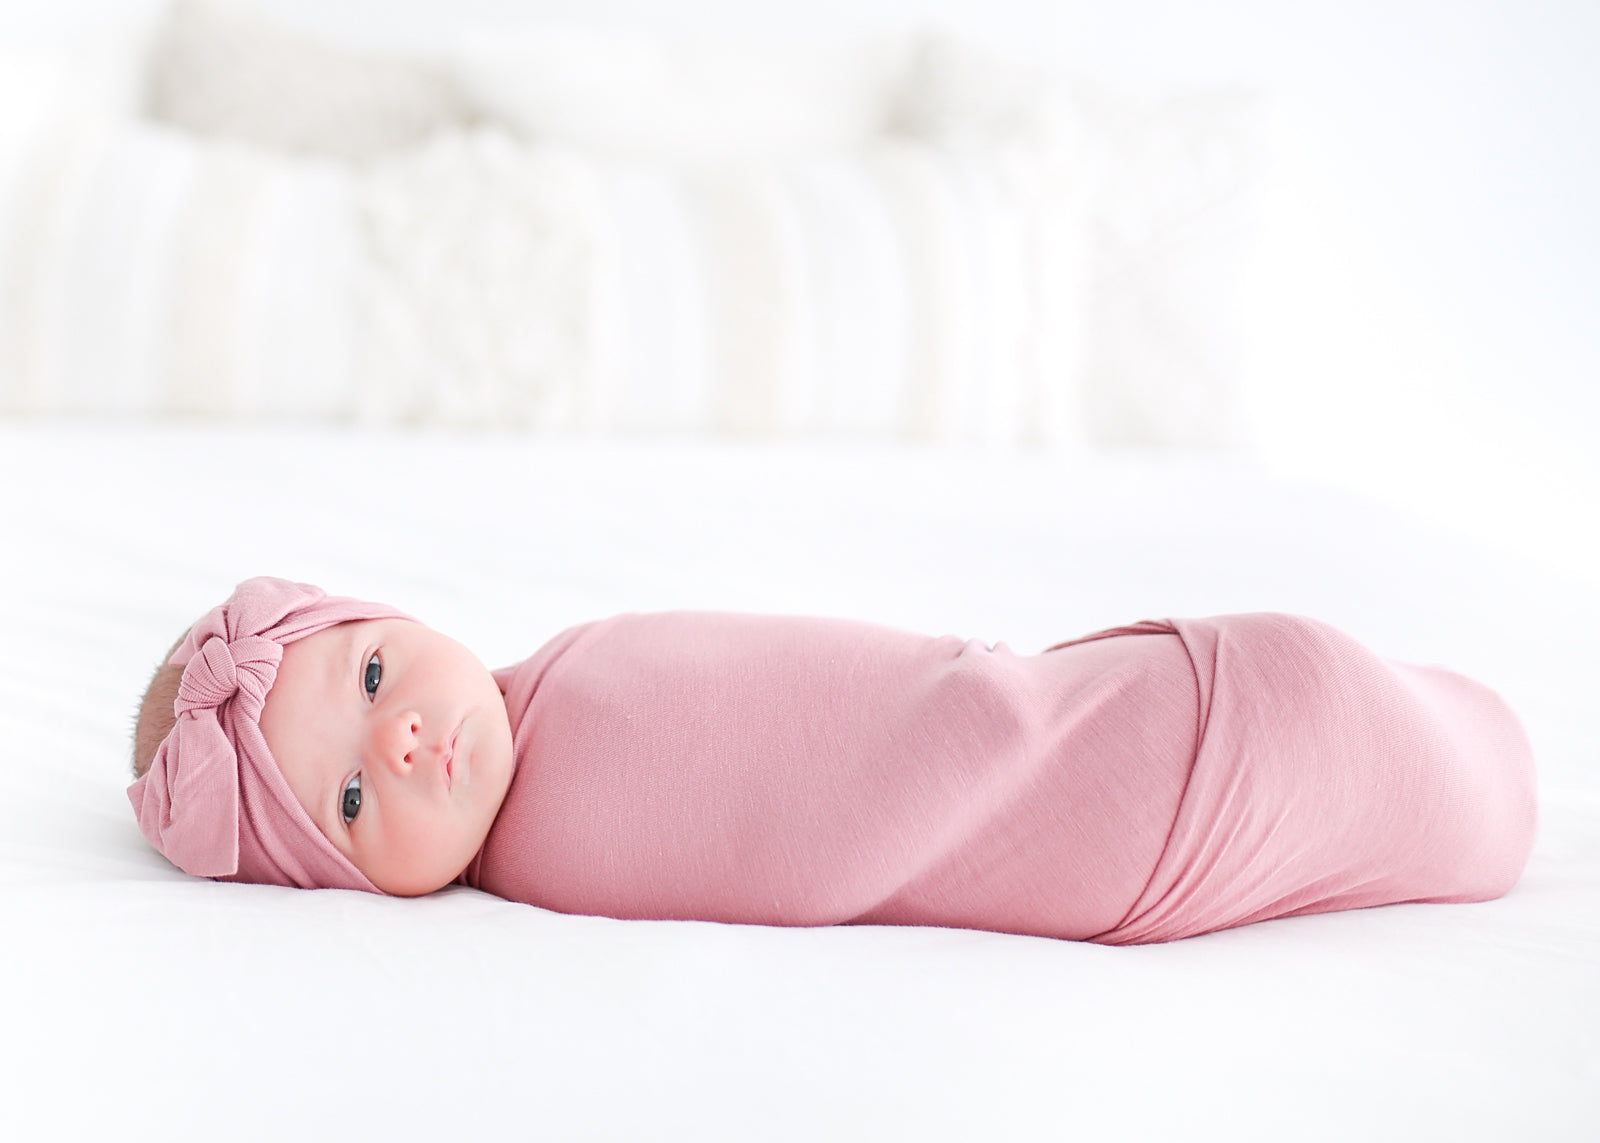 Baby Girl Swaddled in a Pink Swaddle and Headband Set